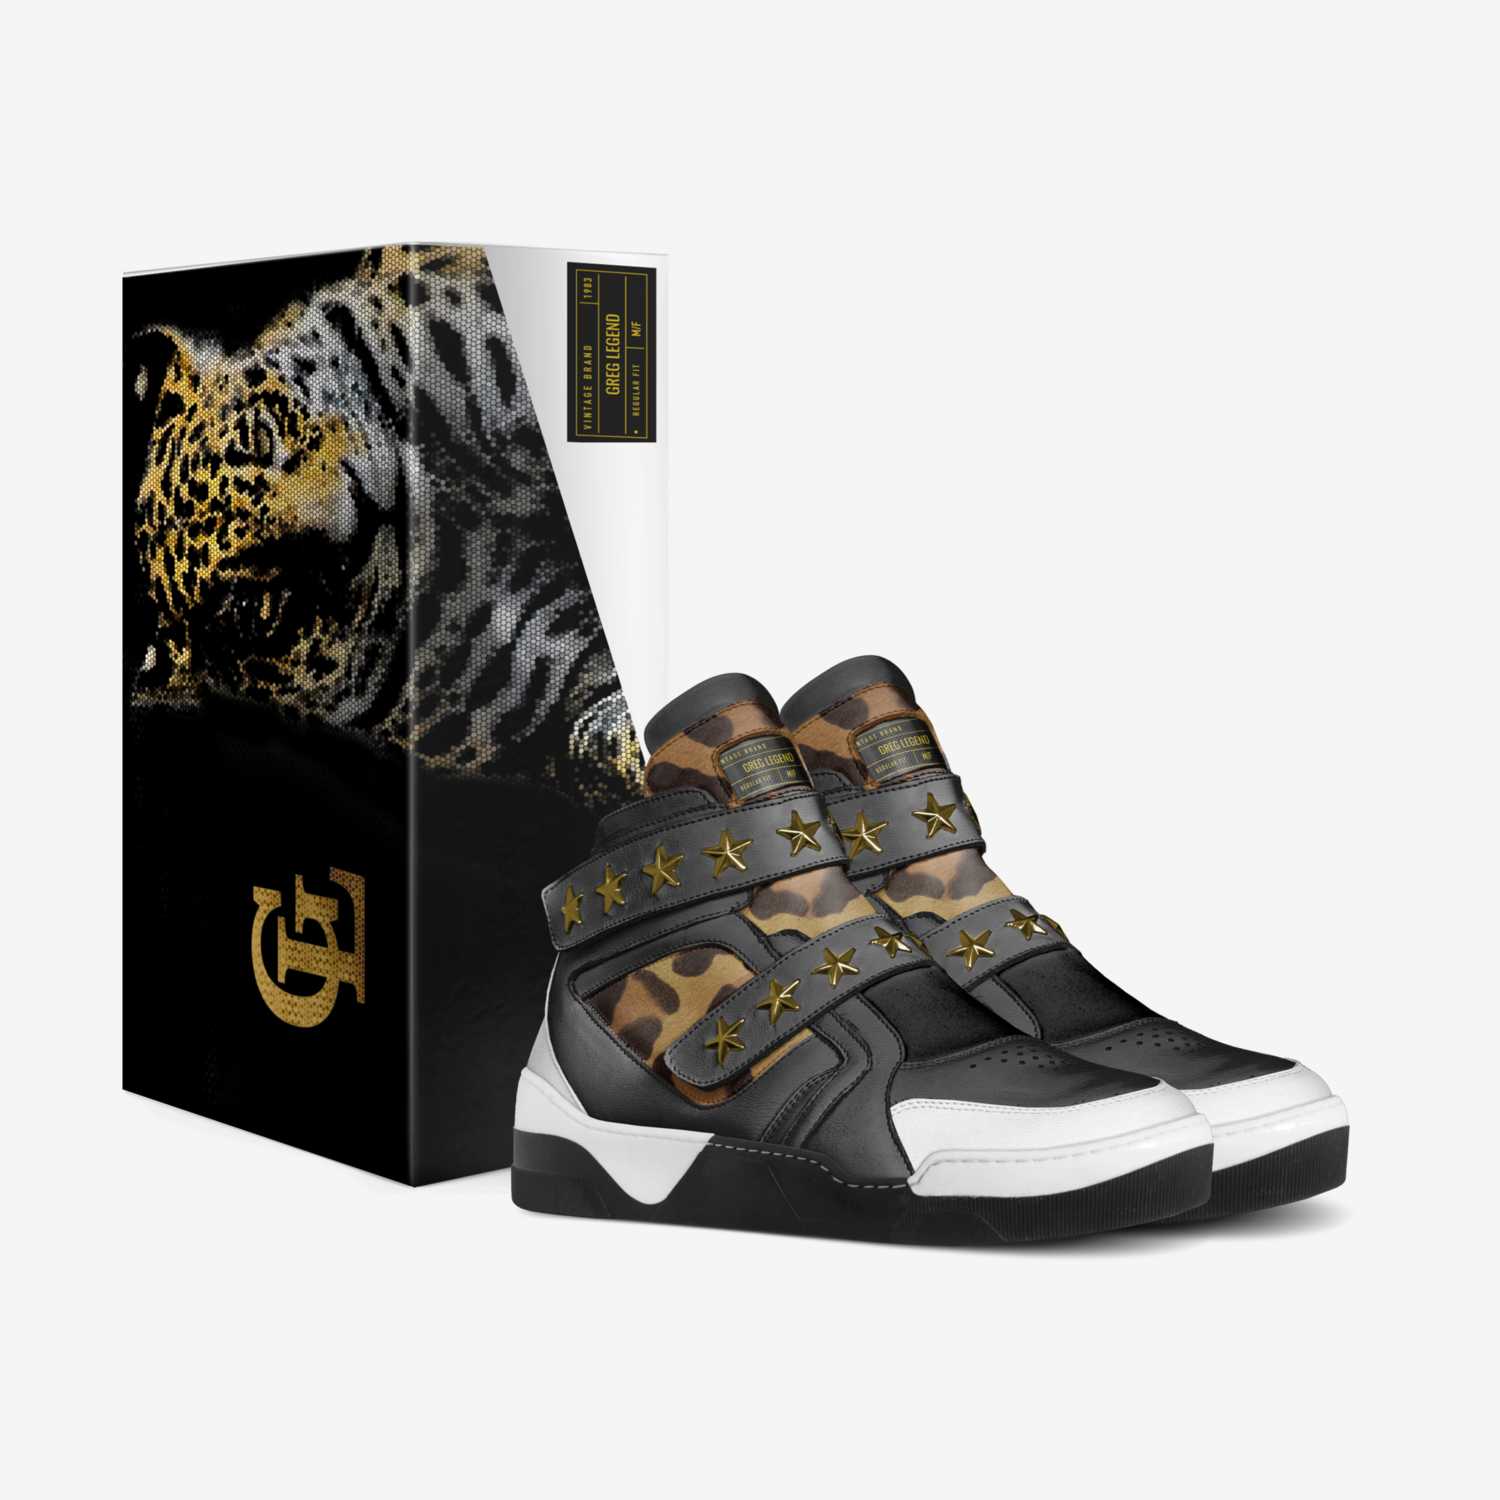 WARRIOR II custom made in Italy shoes by Gregory Decuir | Box view